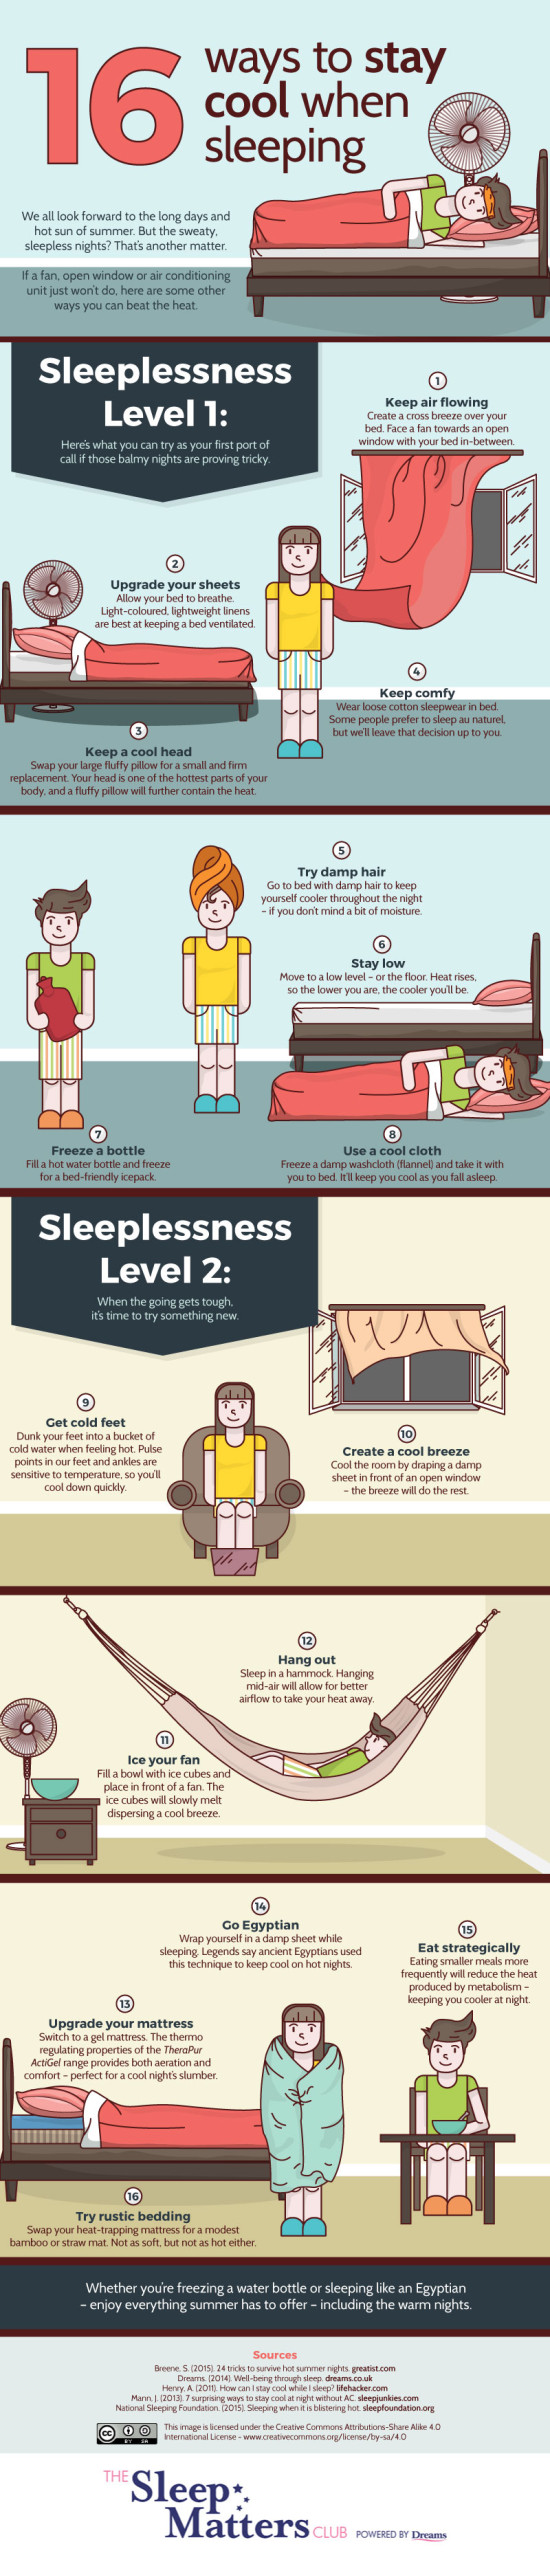 16-ways-to-stay-cool-when-sleeping-infographic